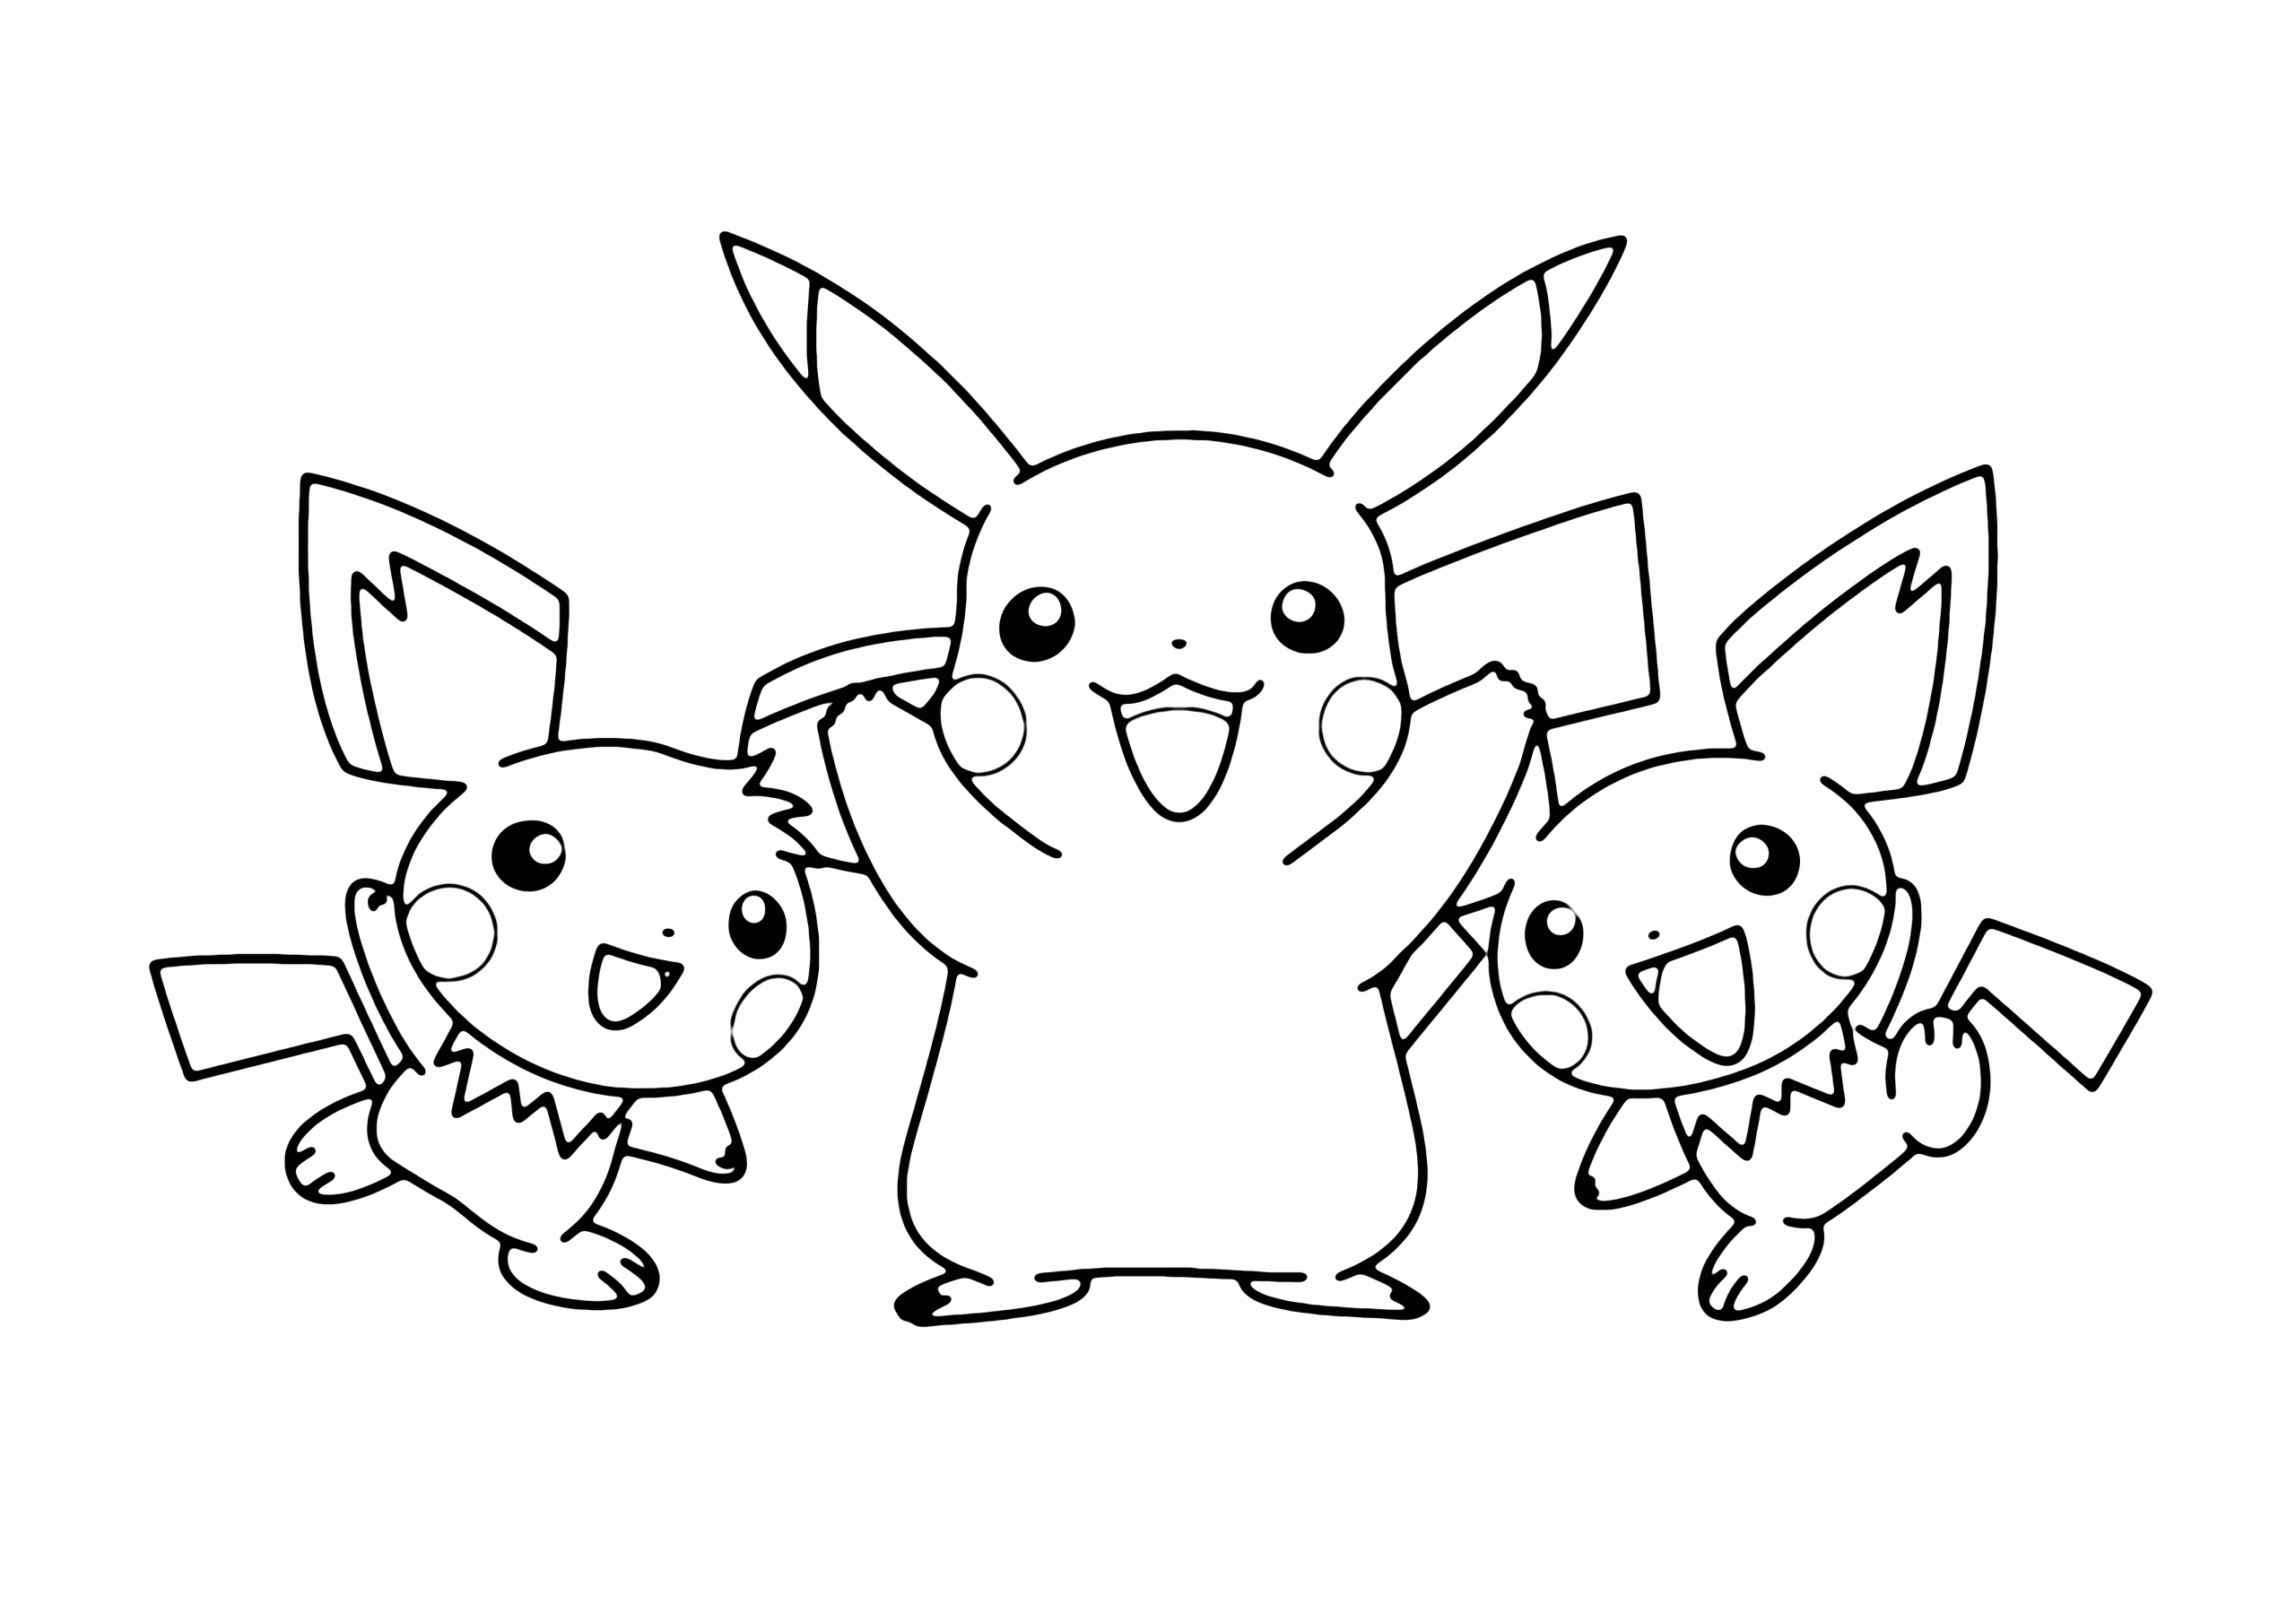 Easy Pokemon Baby Pichu and Pikachu Coloring Page